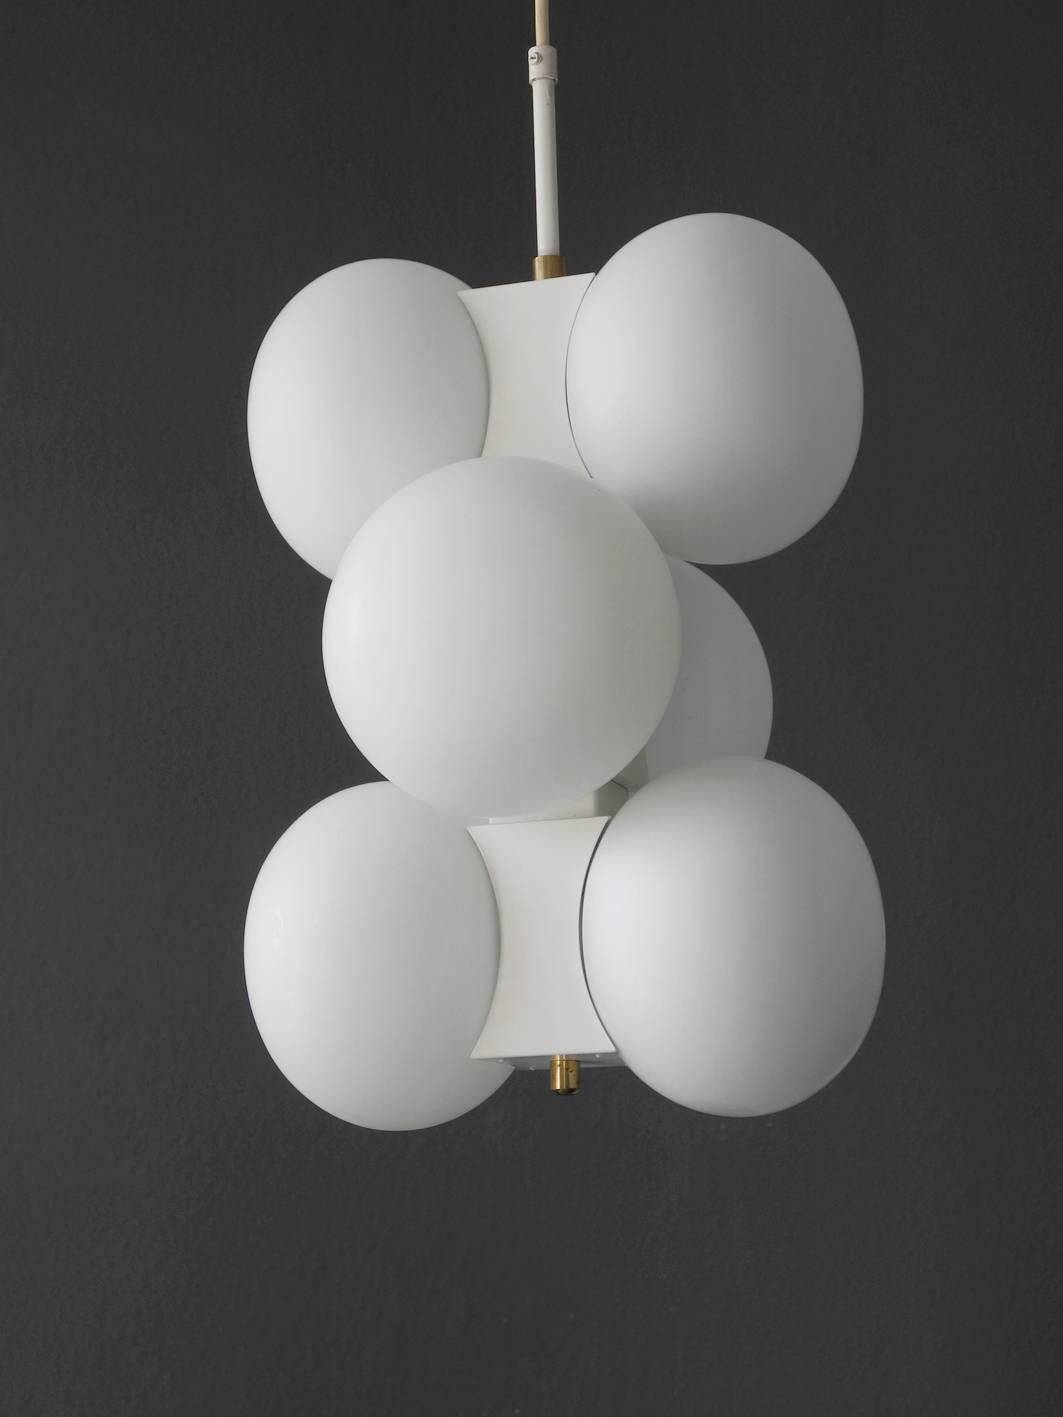 Beautiful original 1960s white Kaiser metal ceiling lamp with six white opal glass balls.
Beautiful sixties Space Age atomic design.
100% original condition with fantastic condition, hardly any usage traces to see.
Fully functional with six E14